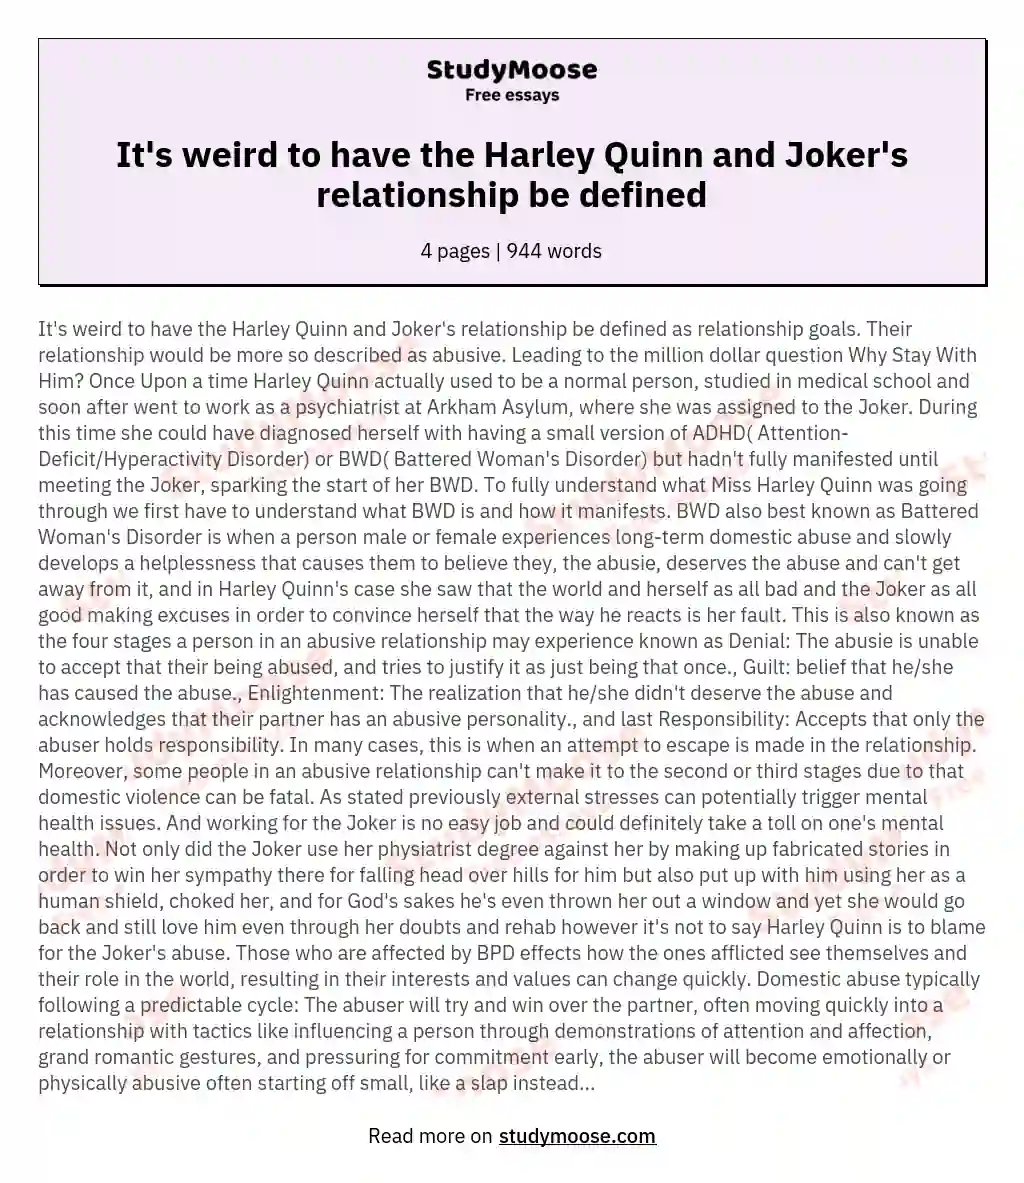 It's weird to have the Harley Quinn and Joker's relationship be defined essay